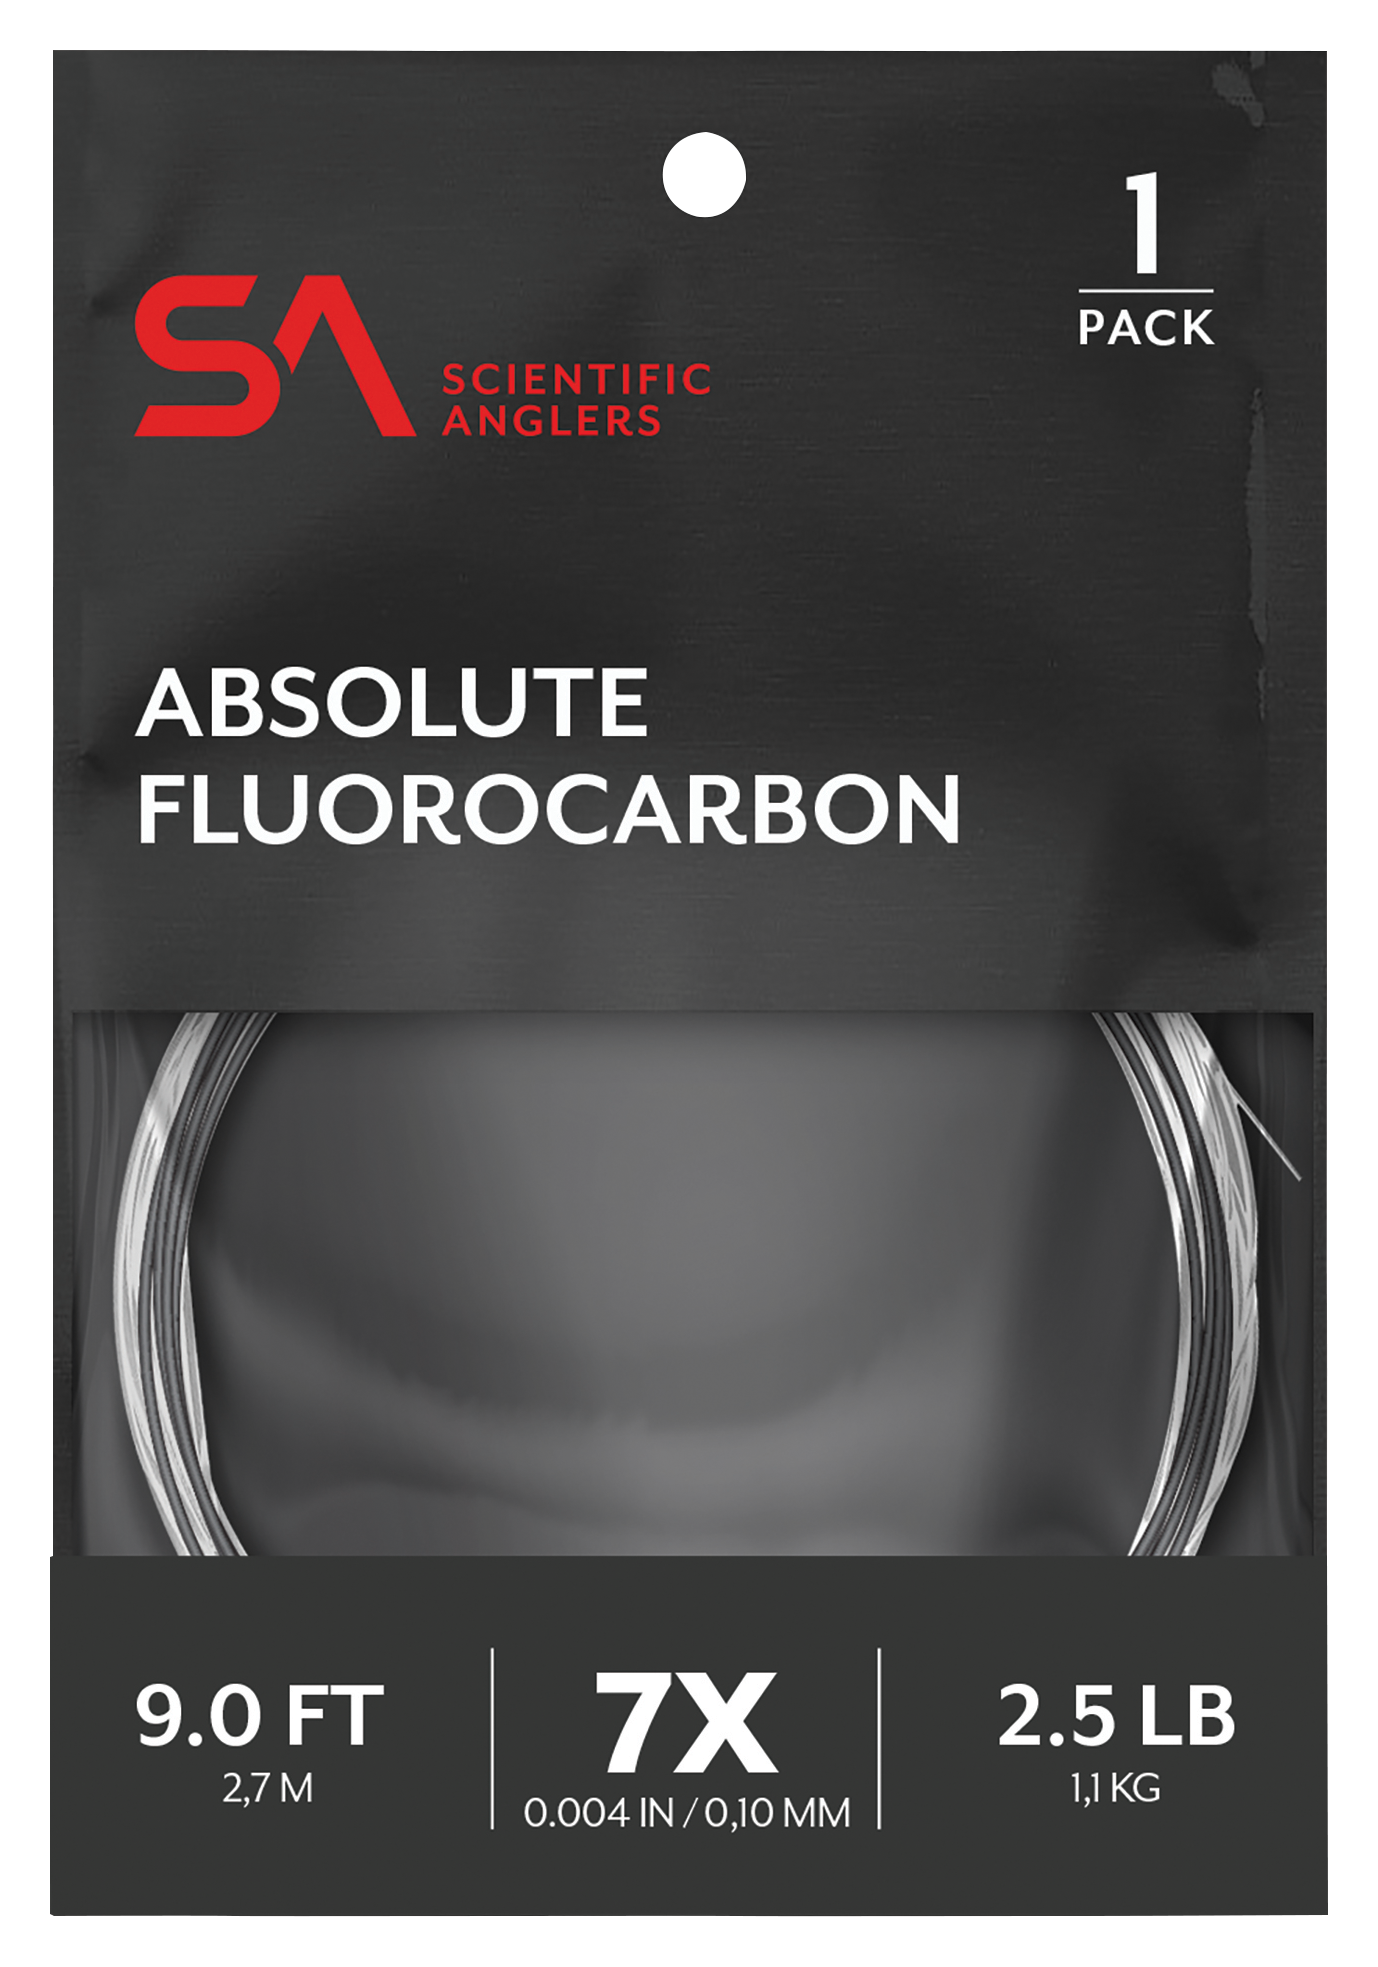 Scientific Anglers Absolute Fluorocarbon Tapered Leader